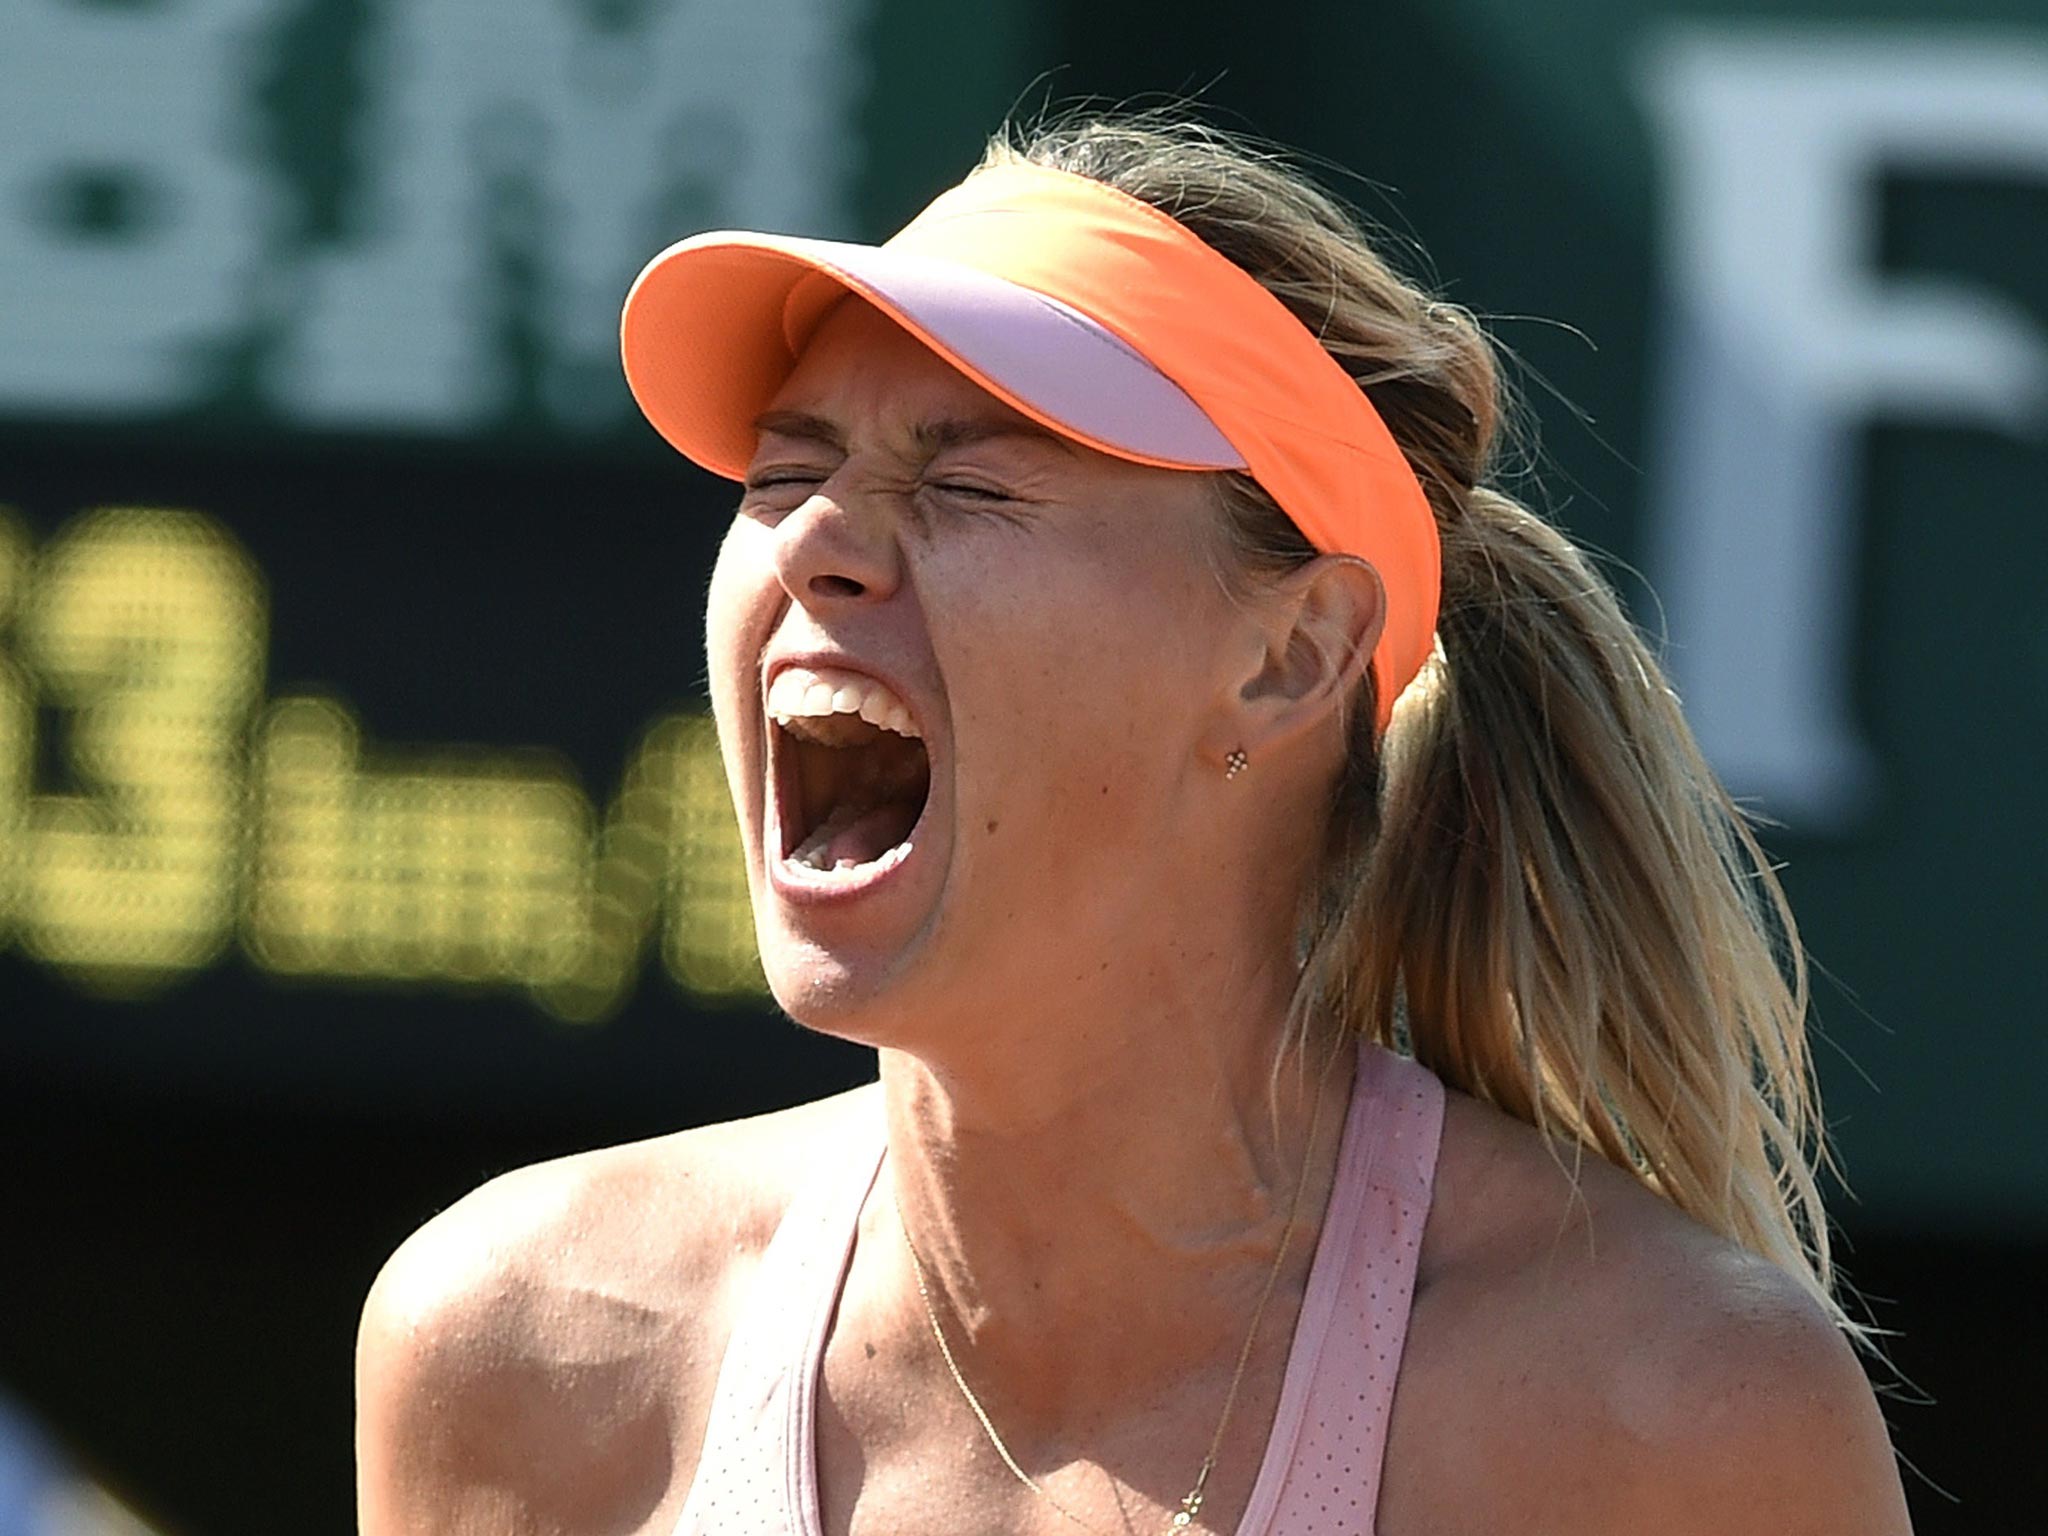 Maria Sharapova came back from a set down to beat Eugenie Bouchard yesterday